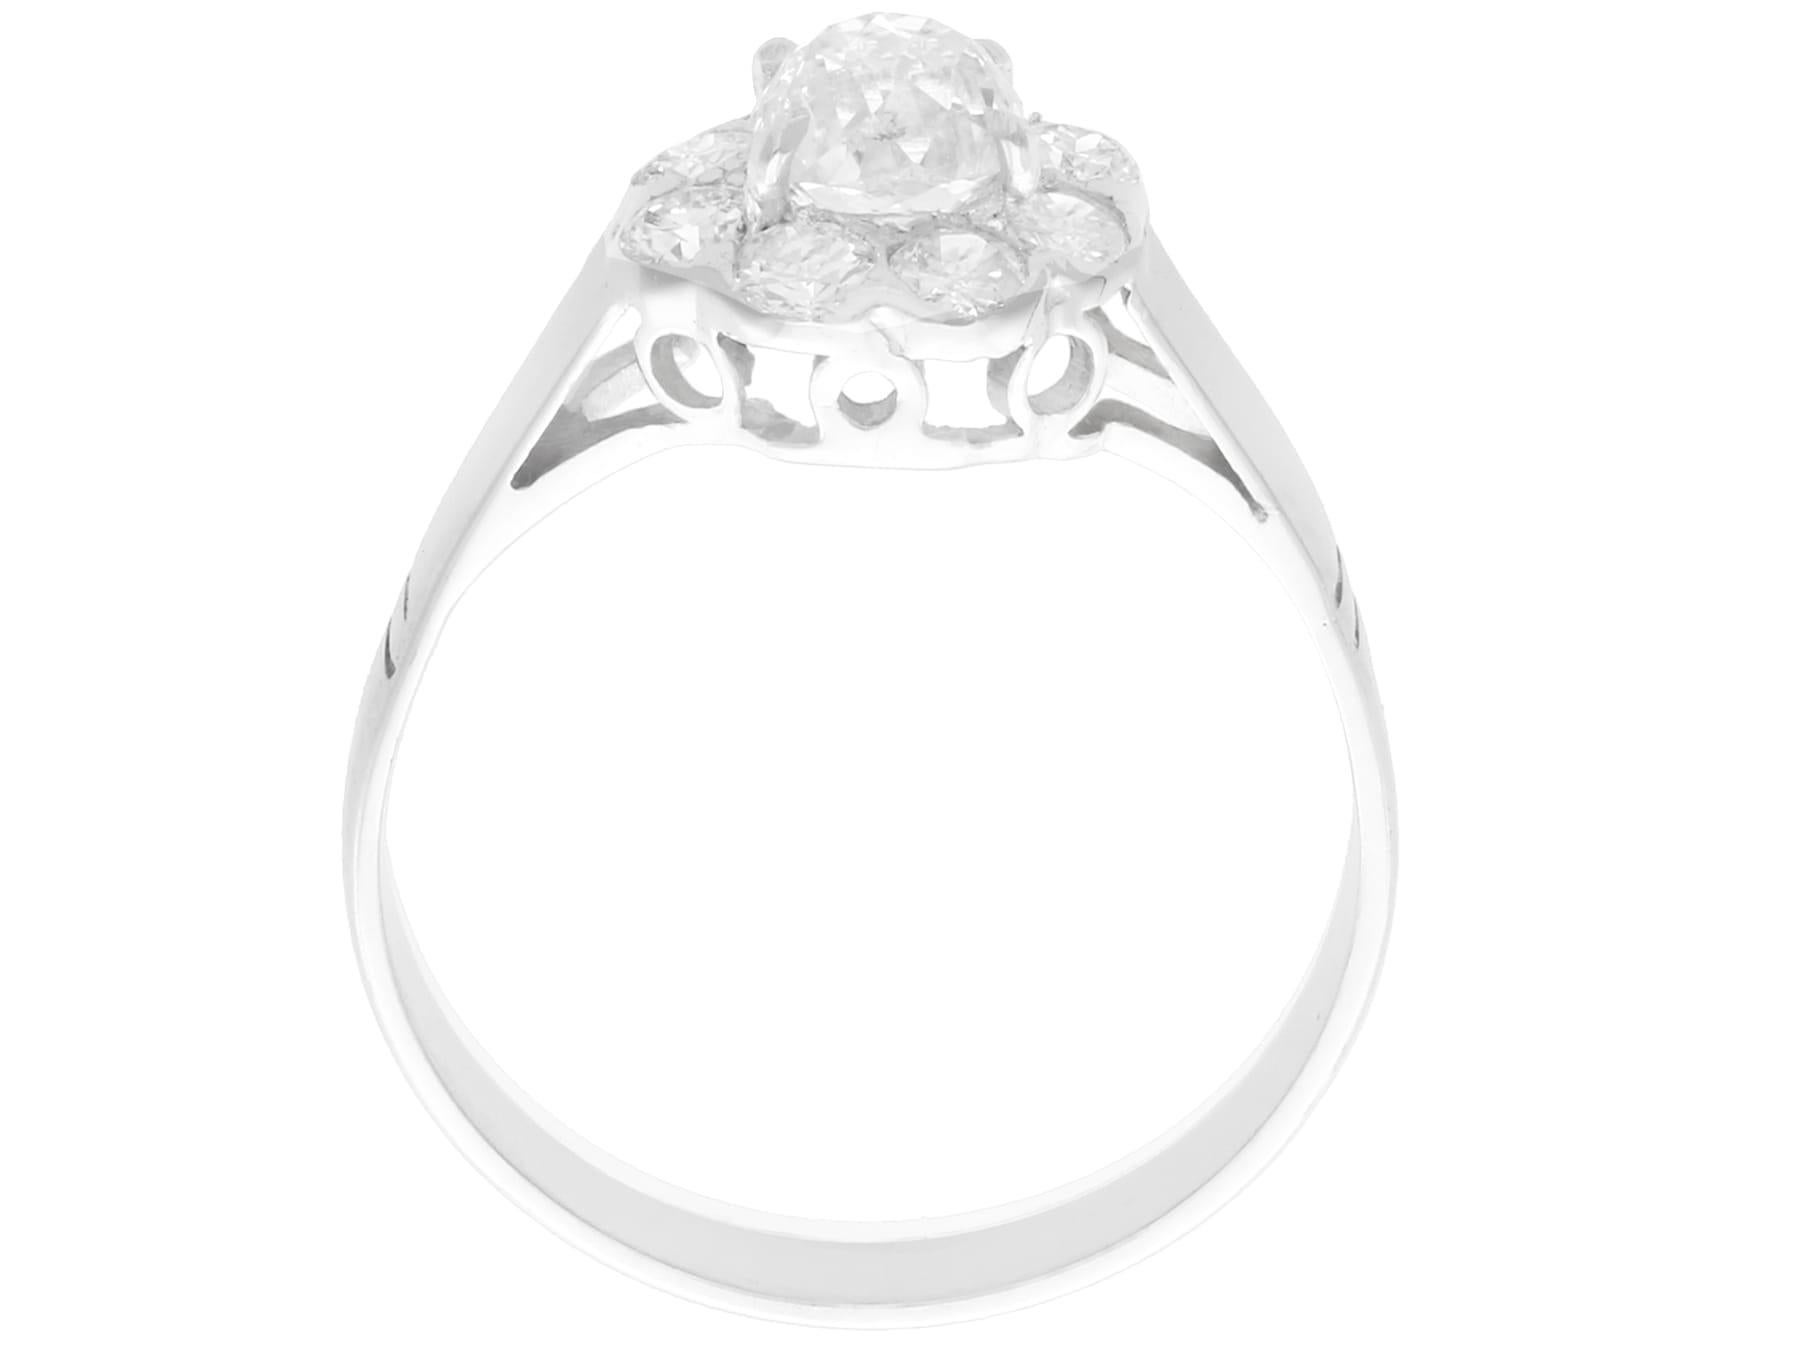 1920's engagement ring styles